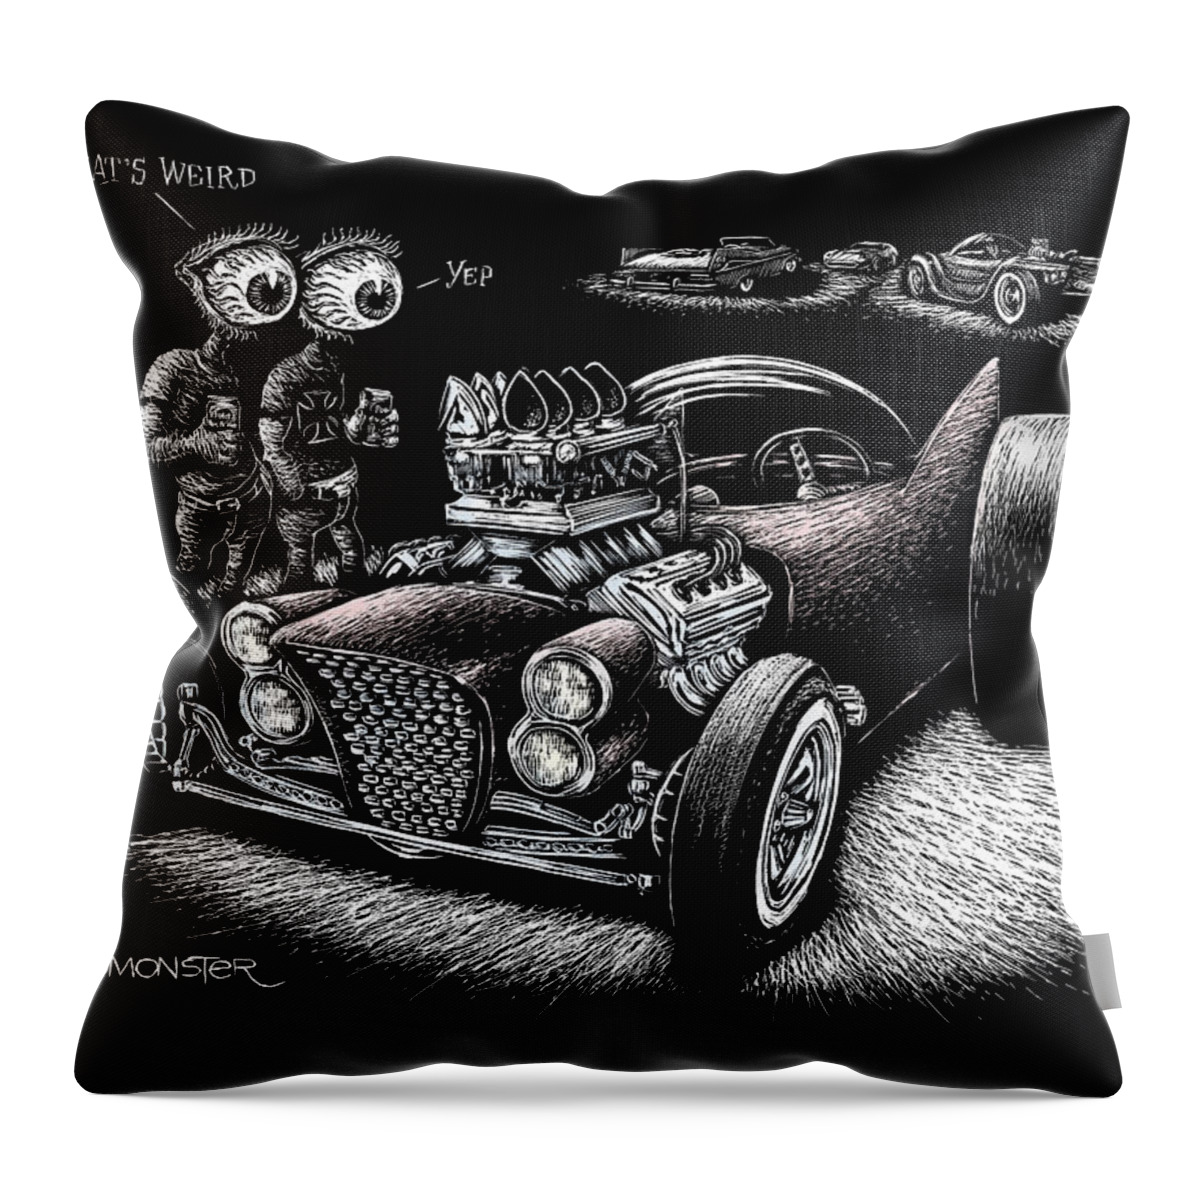 Lowbrow Throw Pillow featuring the drawing Atomic Weirdness by Bomonster 